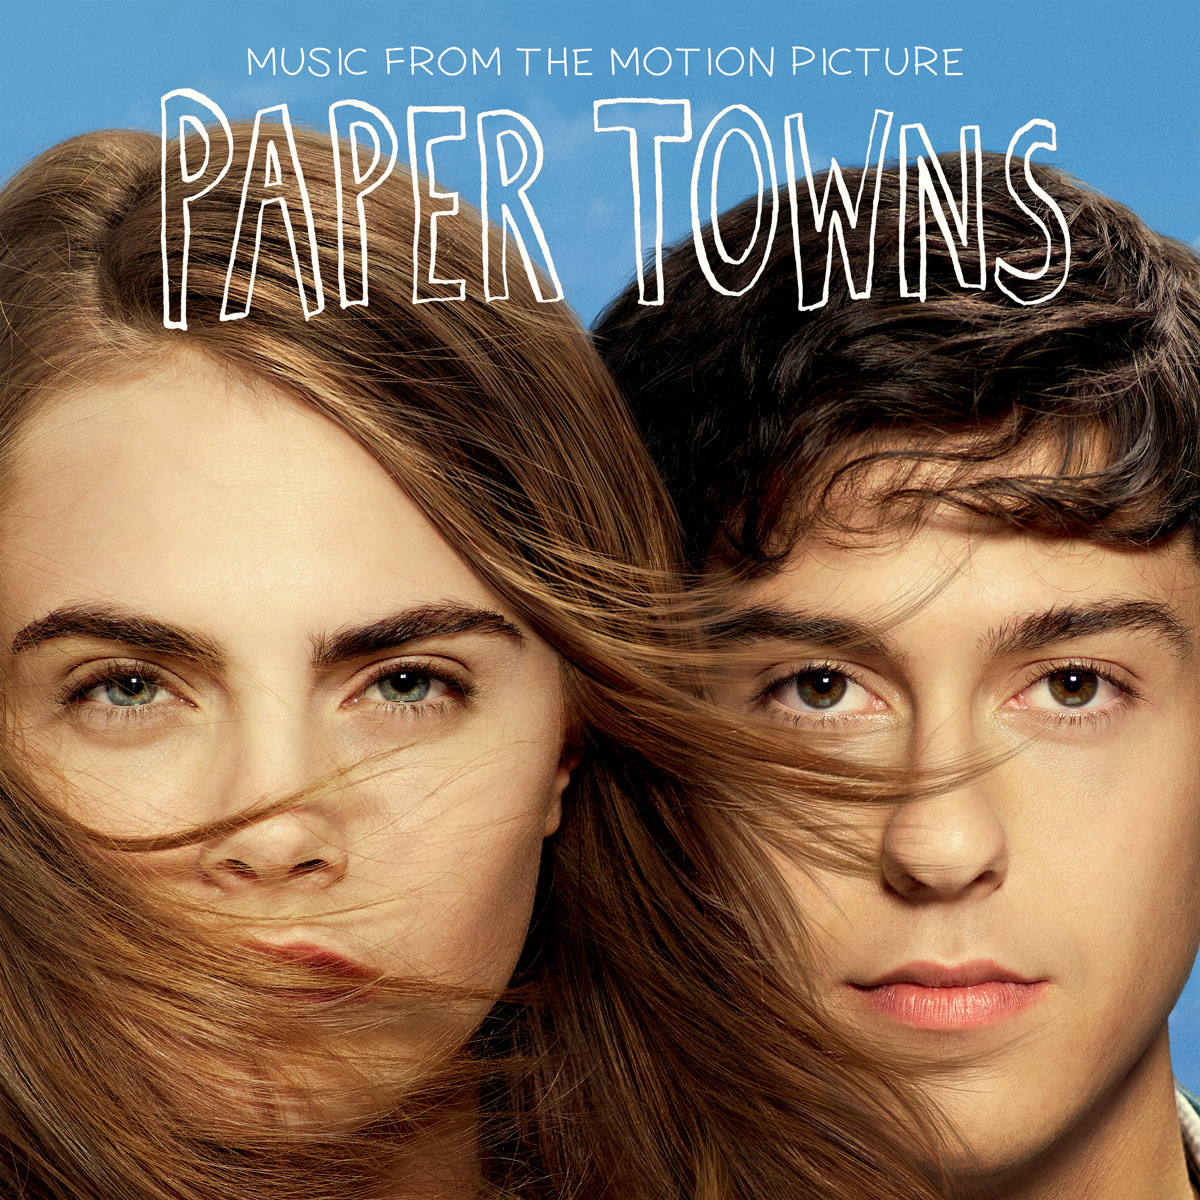 Download Paper Towns 2016 full movie hd online free - Downloads Paper Towns | Official HD 2 | 2015